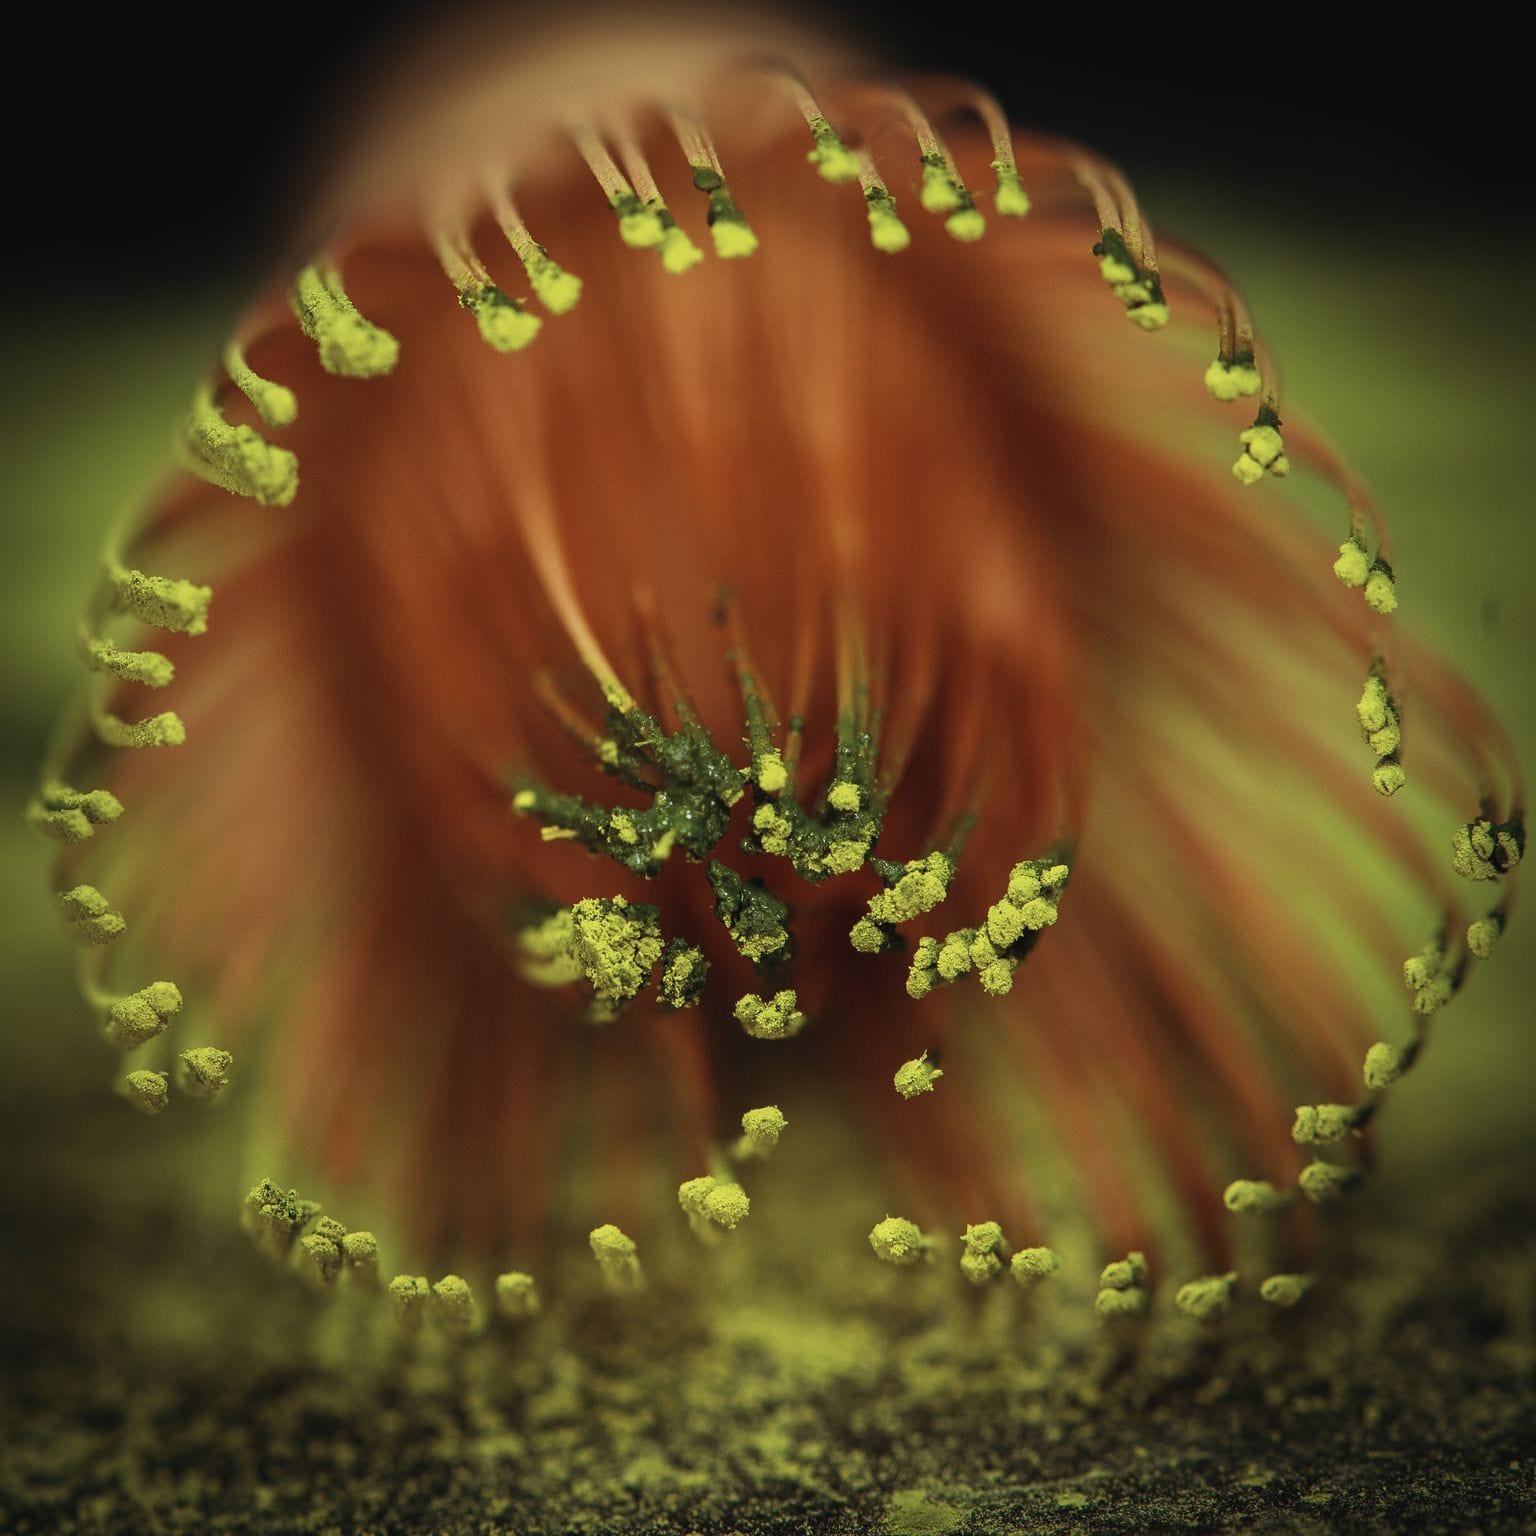 Close-up of a vibrant red-orange flower stamen surrounded by tiny, yellow pollen grains. The petals form a circular pattern around the stamen, creating a visually striking contrast against a blurry, green background. This natural beauty evokes the calming essence of Magic Hour Artisanal Magic Hour Matcha Whisk.